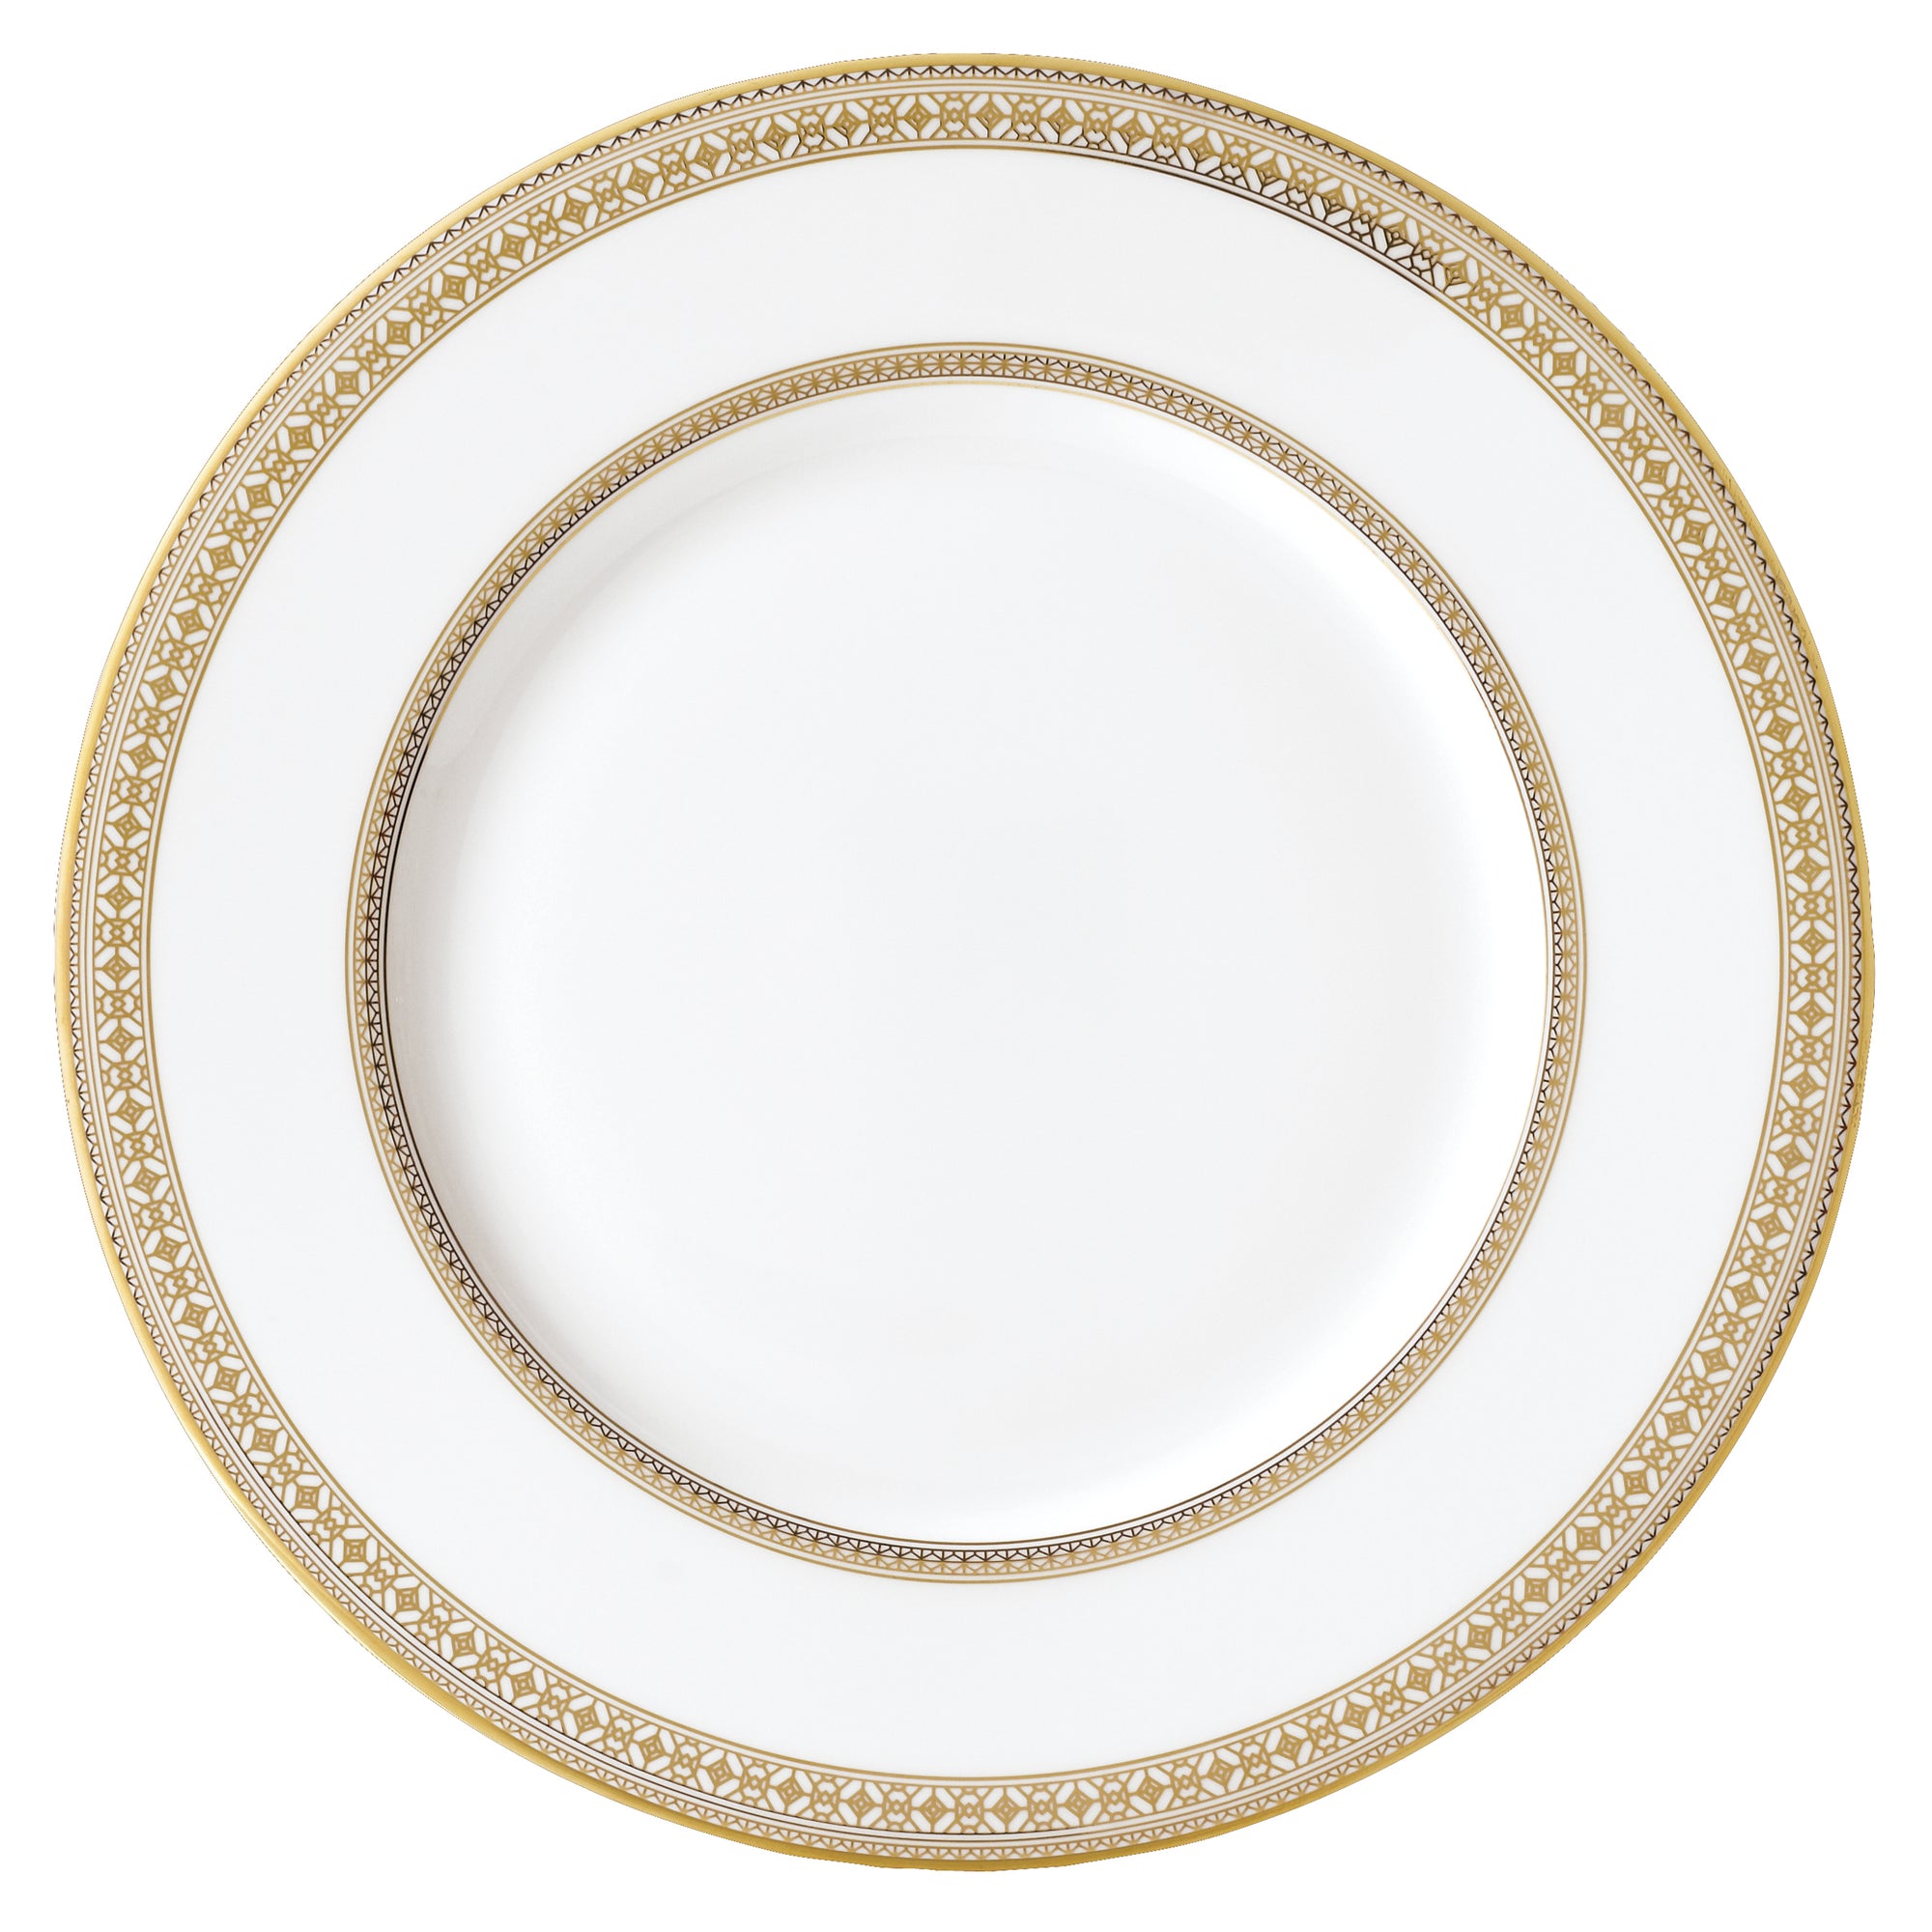 Prouna Golden Leaves Charger Plate White Background Photo